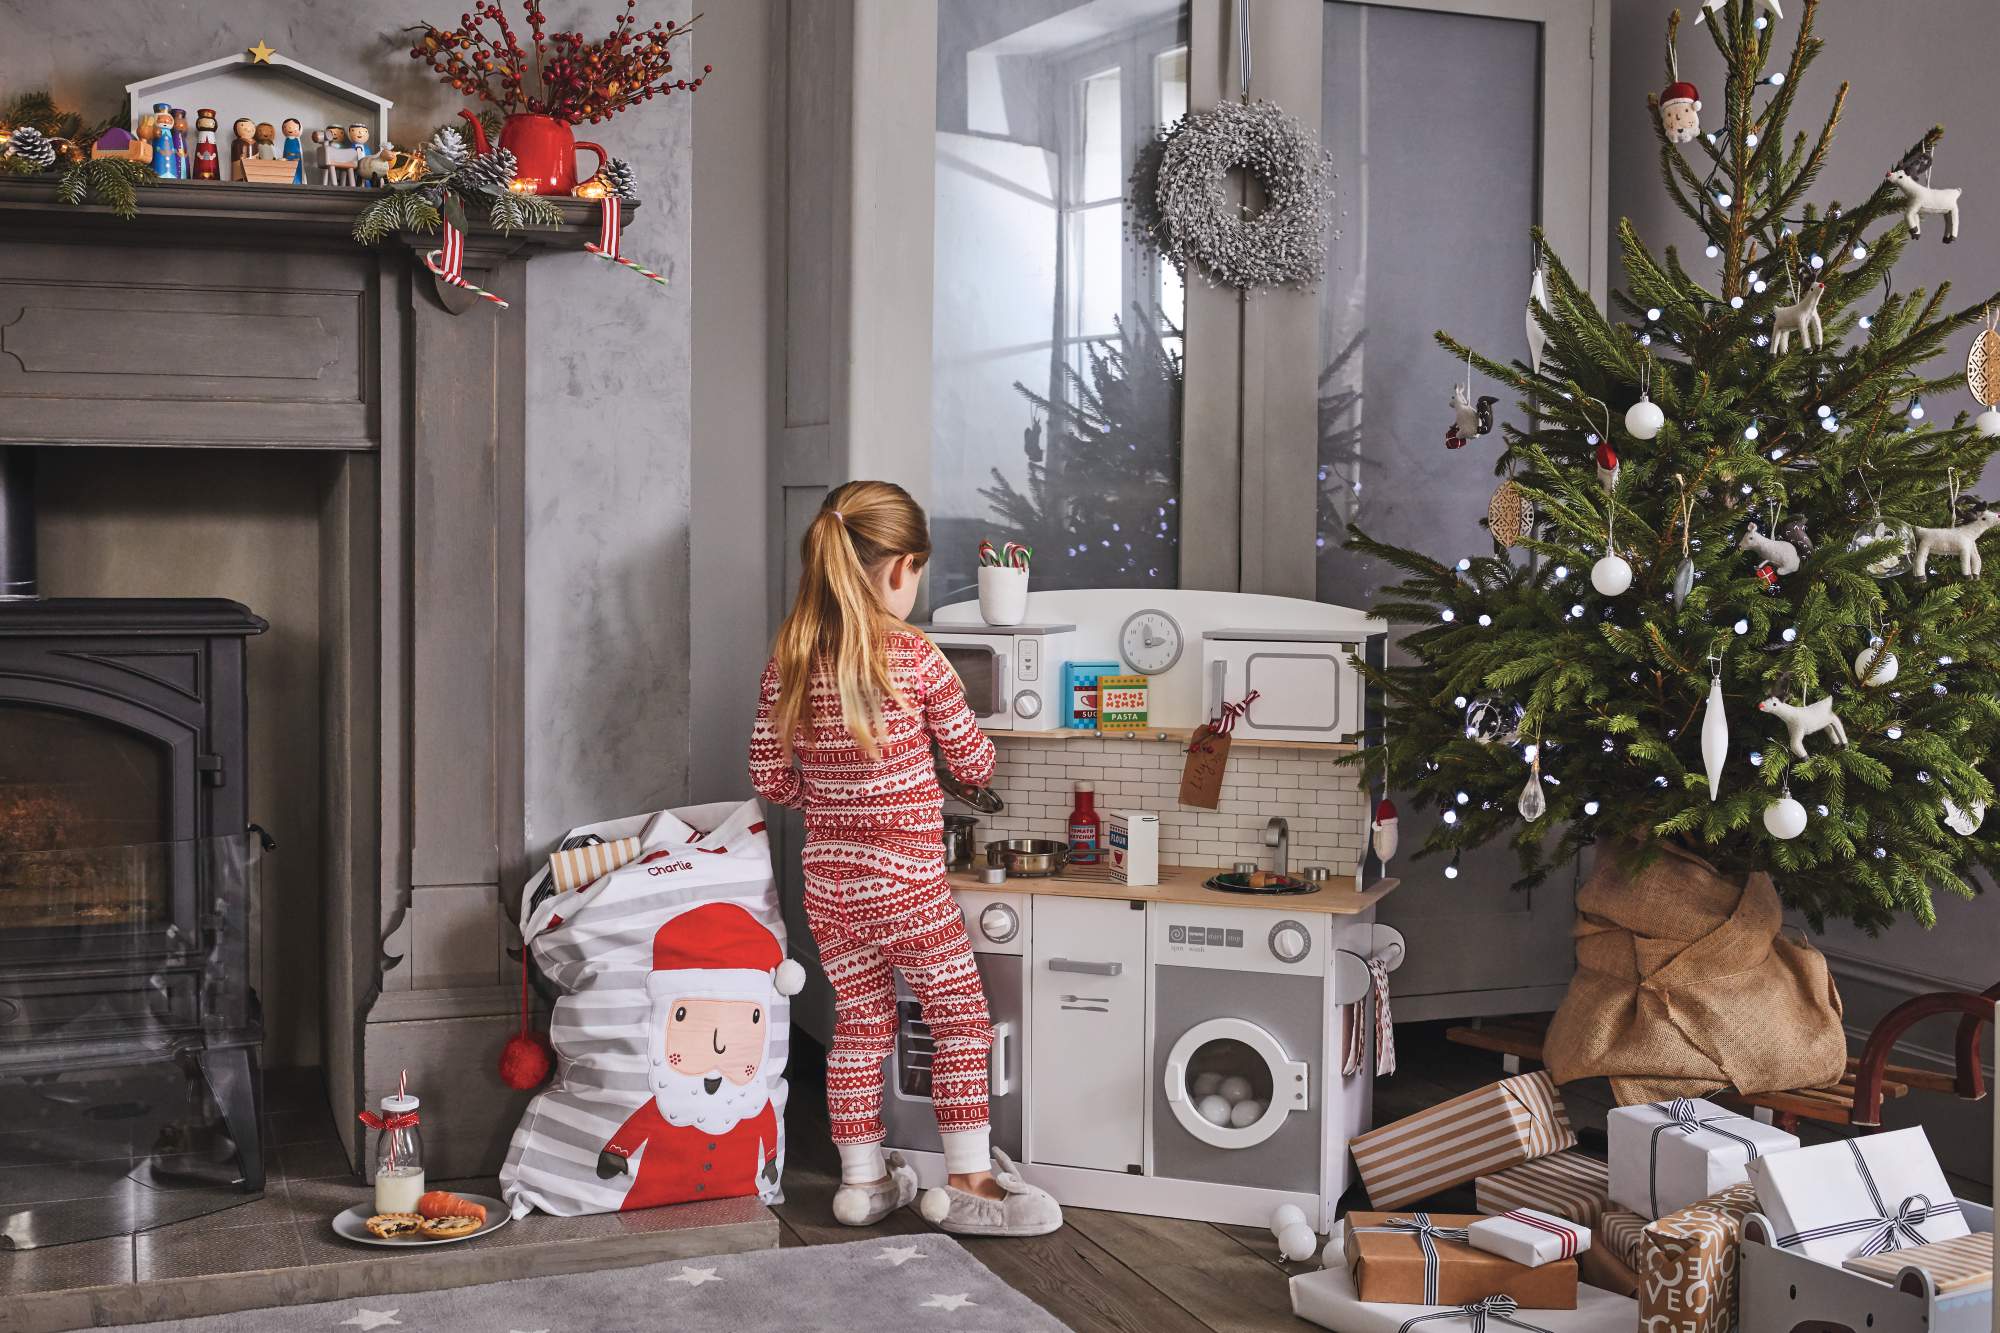 Which play kitchen should you choose this Christmas?